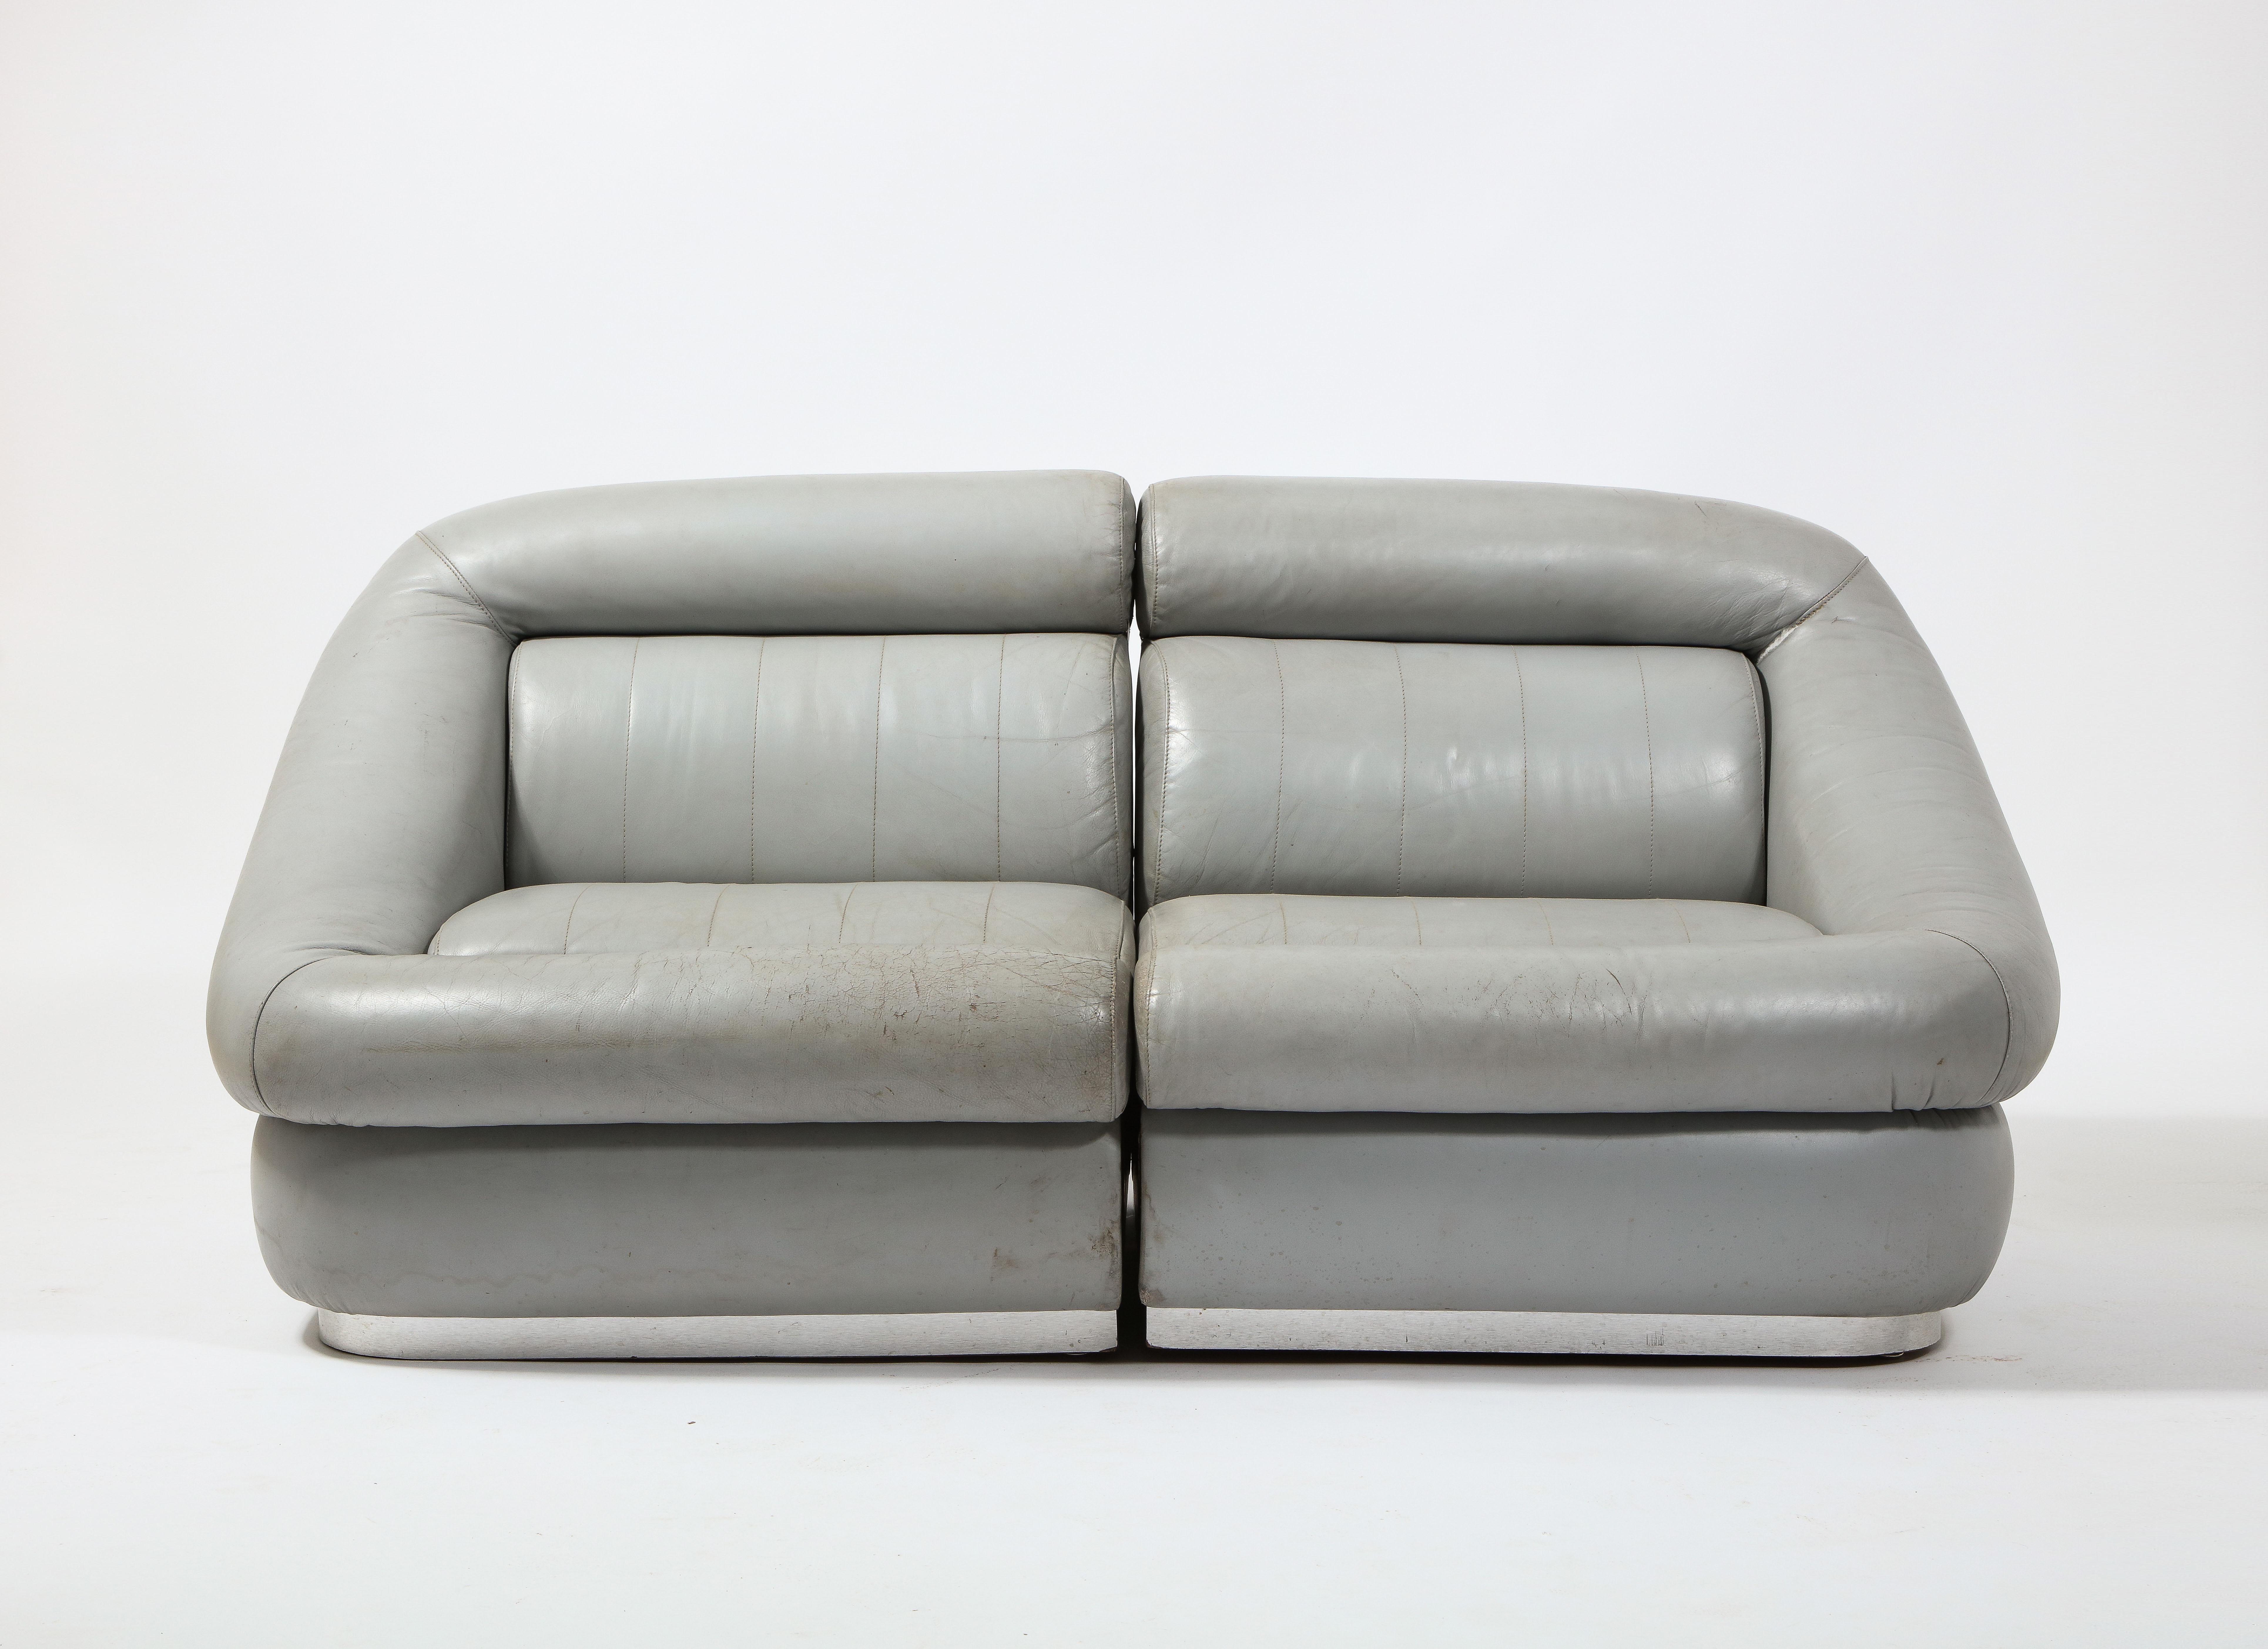 Elegant and comfortable two-piece settee in original gray leather on aluminum-clad bases. 

Two matching settees are available. They are priced individually.